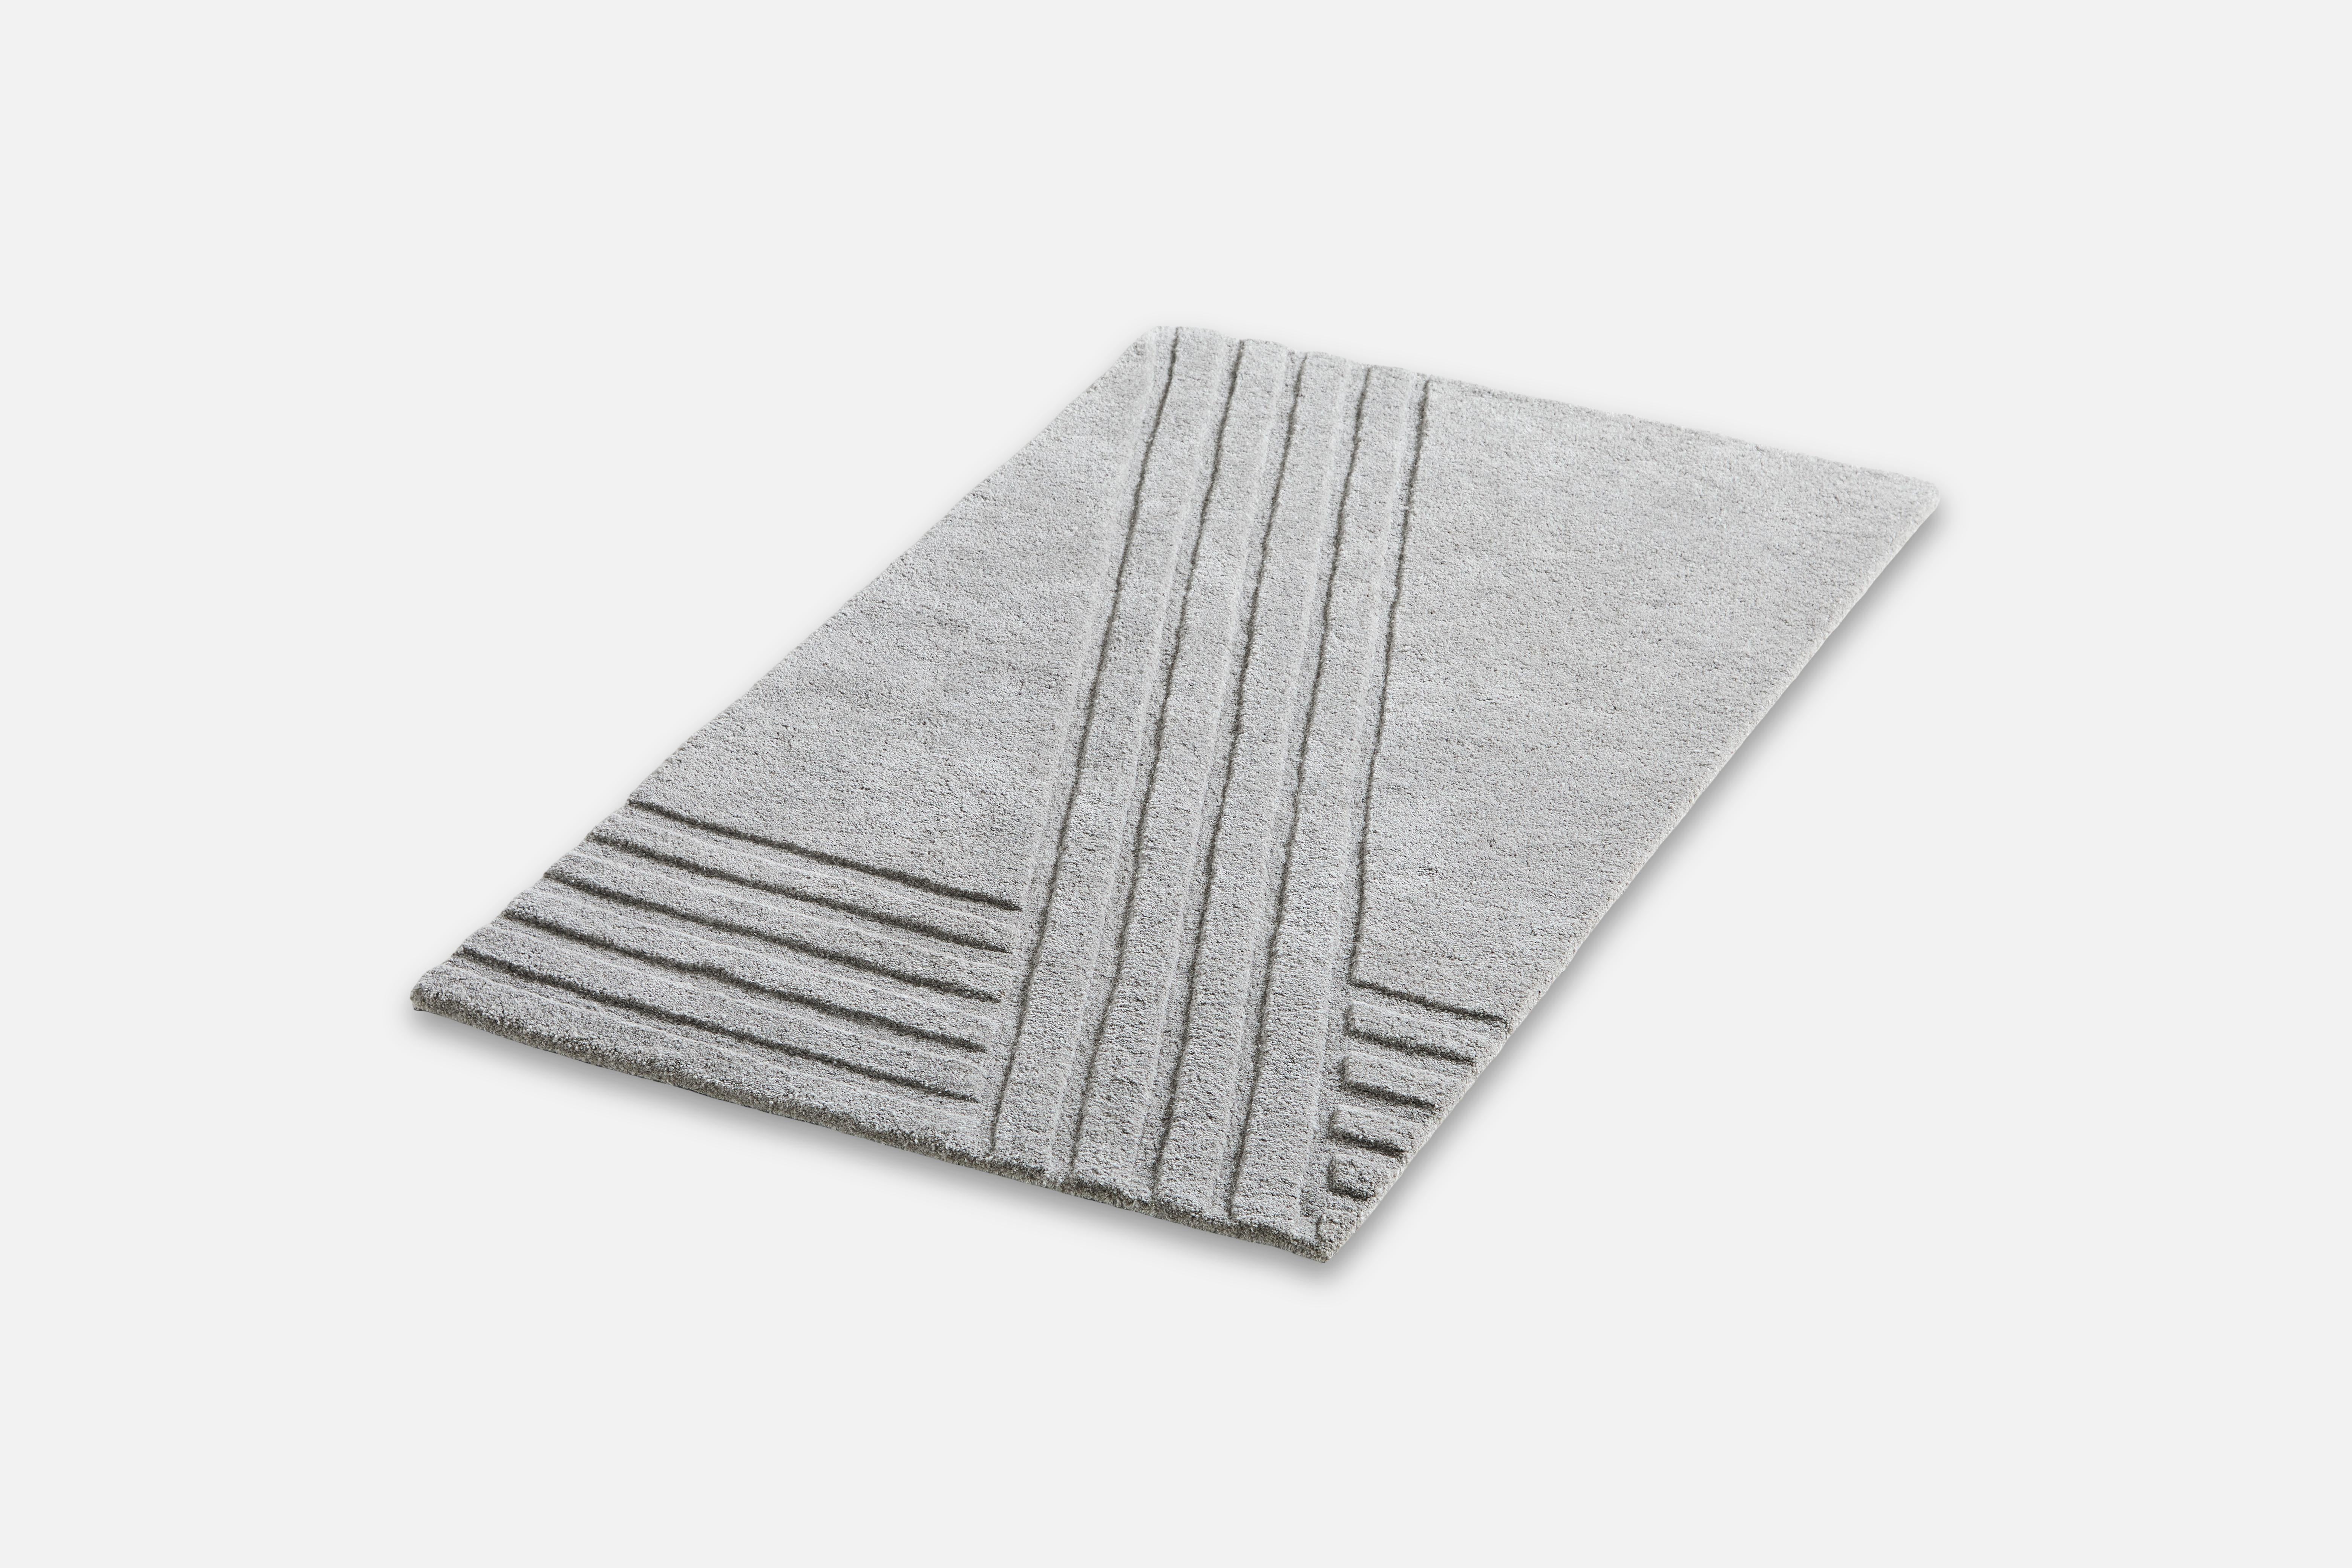 Grey Kyoto rug I by AD Miller.
Materials: 80% wool, 20% cotton.
Dimensions: W 90 x L 140 cm.
Available in grey or off white.

The hand-tufted wool rug, Kyoto, takes its inspiration from the distinctive pattern found in traditional raked